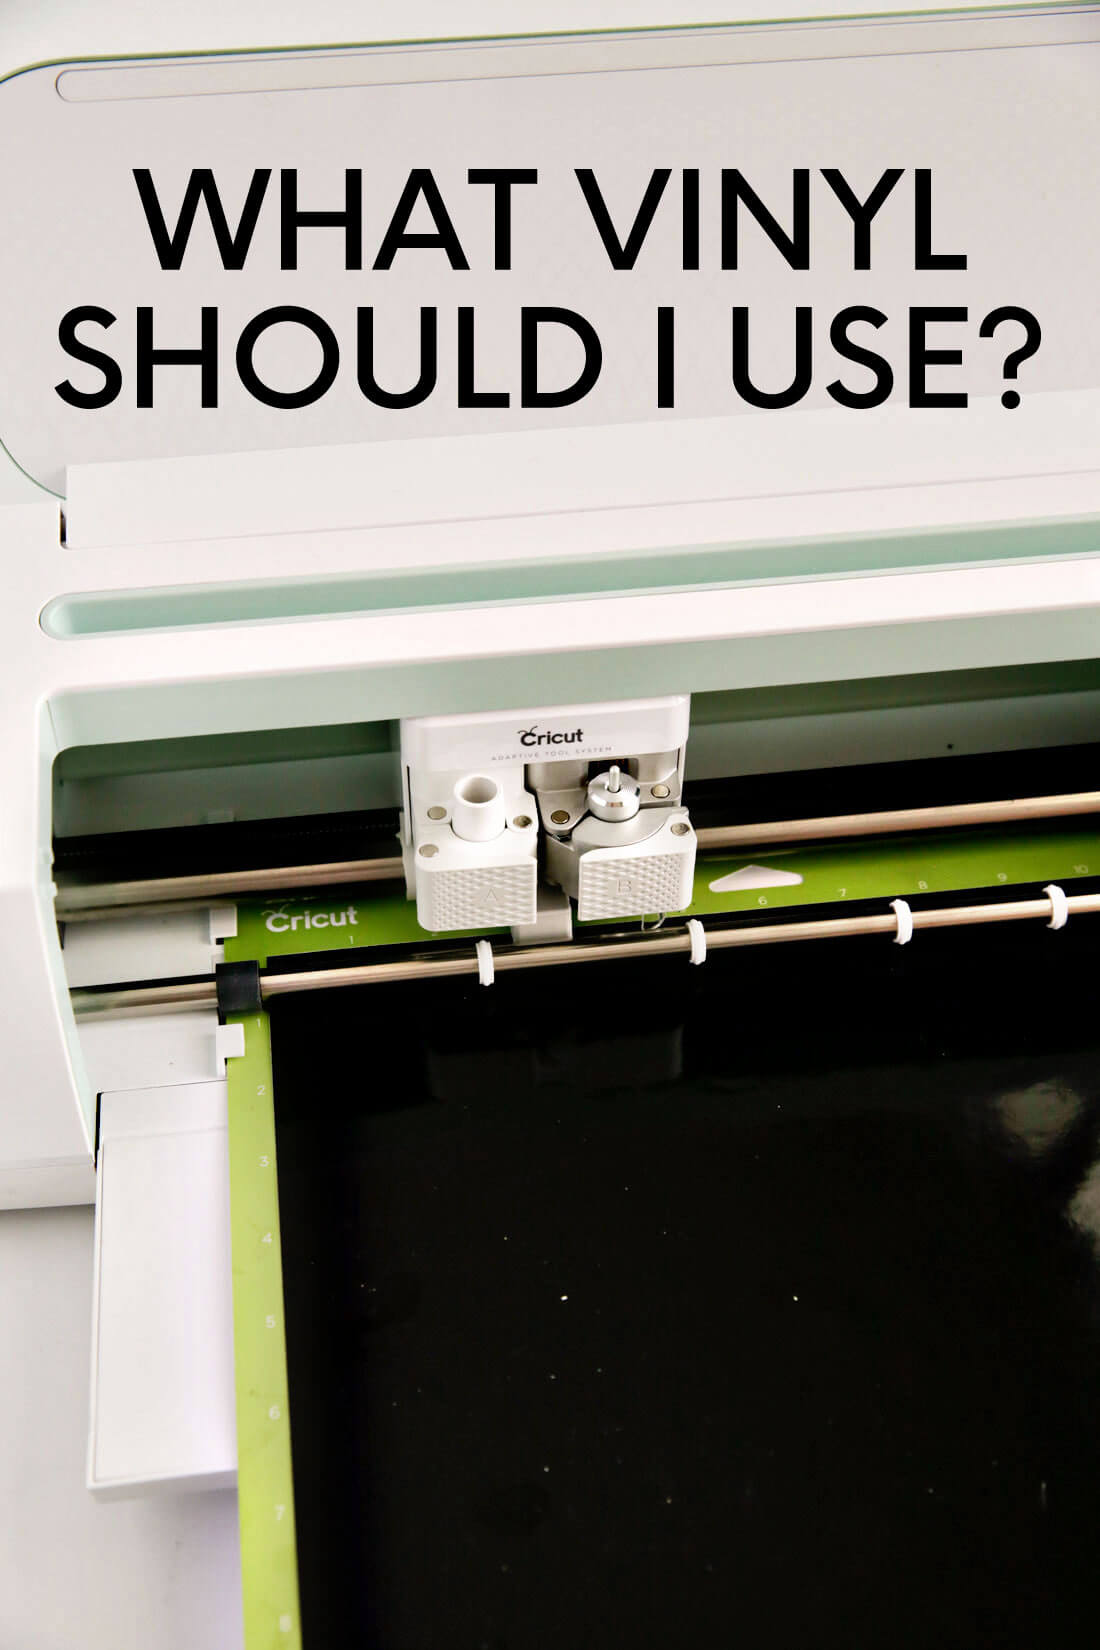 What Vinyl Should I Use? Cricut Vinyl vs. Others From 30daysblog